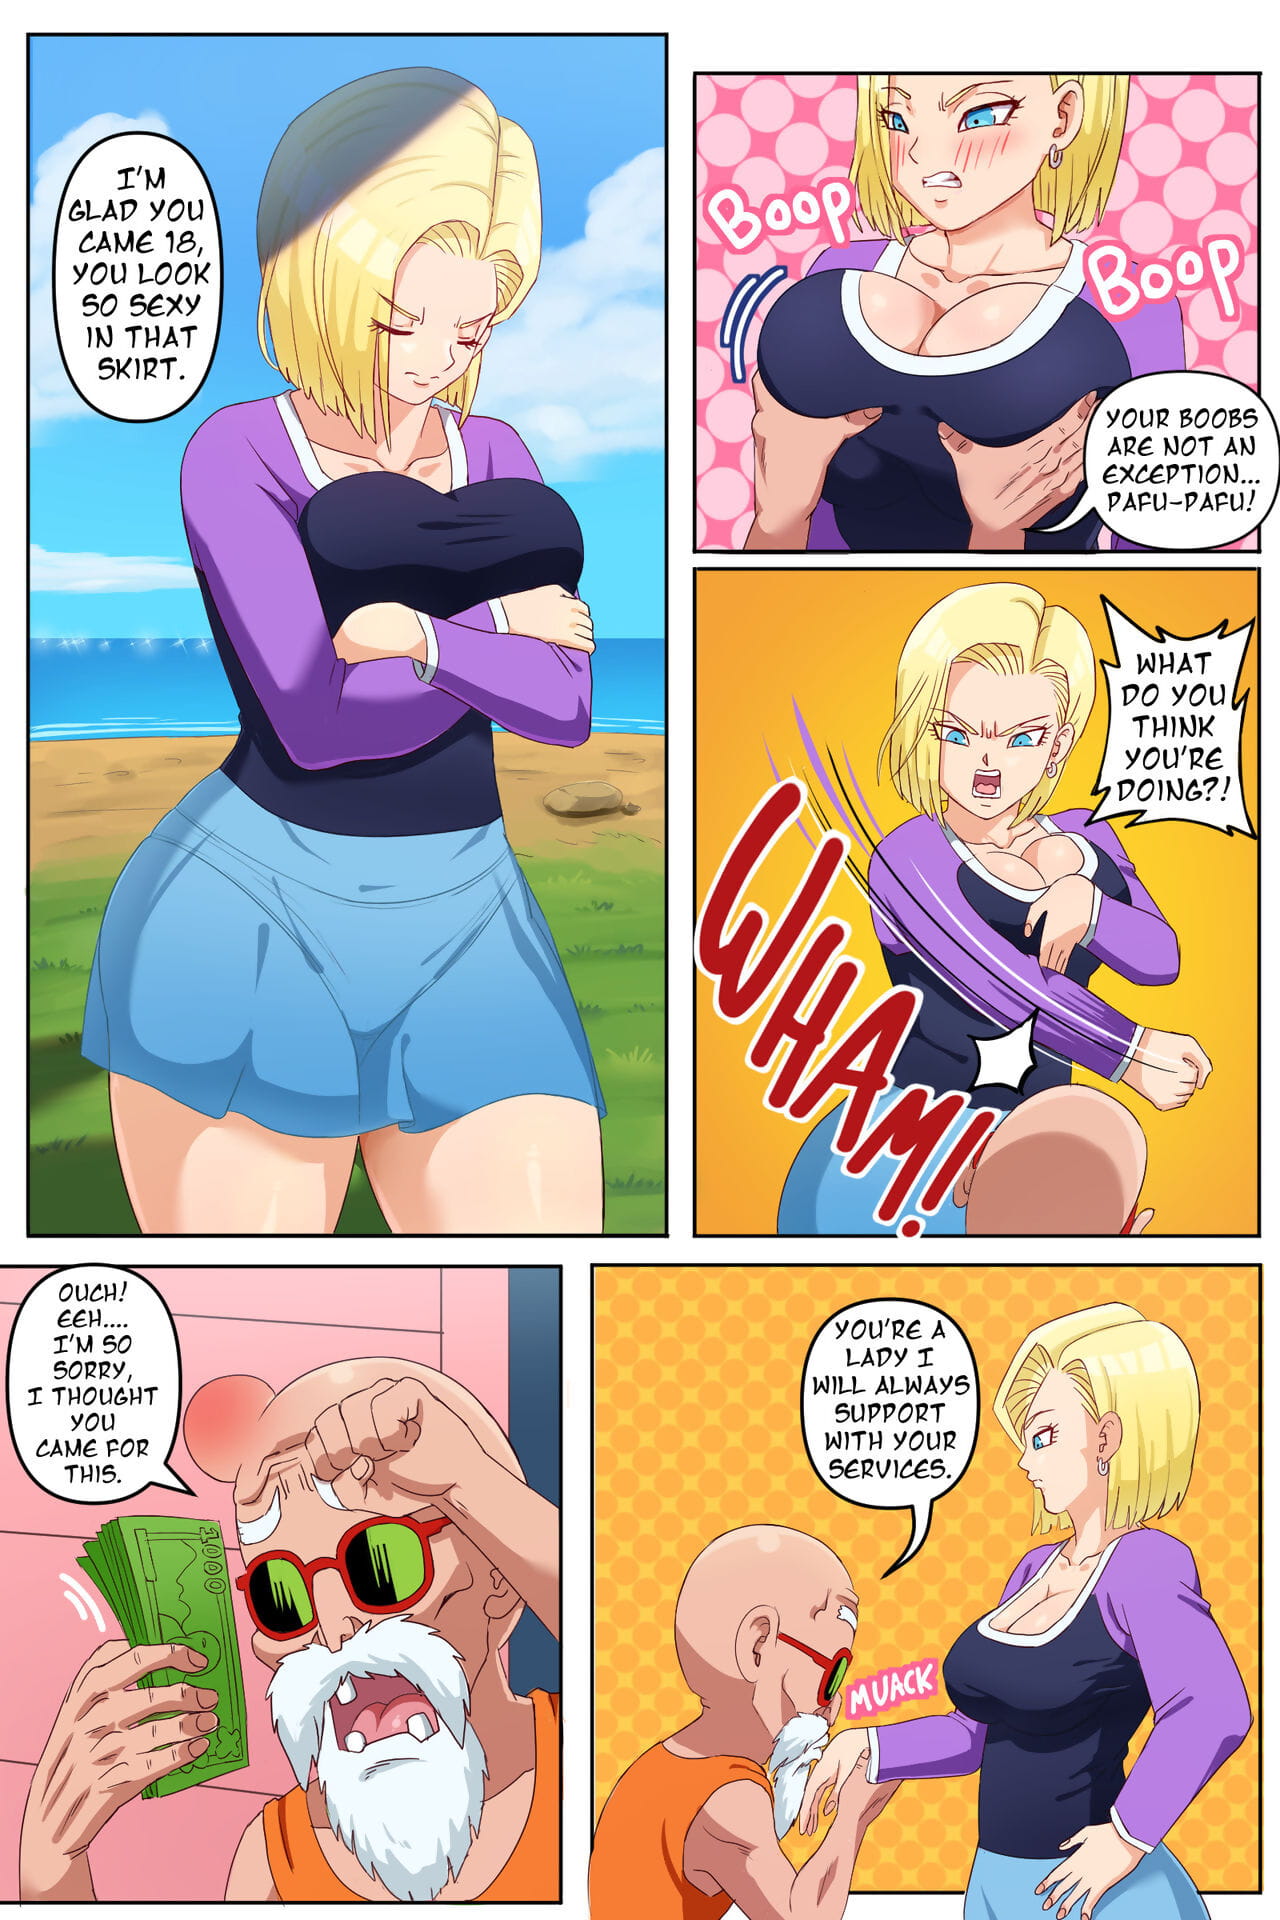 dragonball Super pinkpawg – android 18 ntr – ep 1 page 1